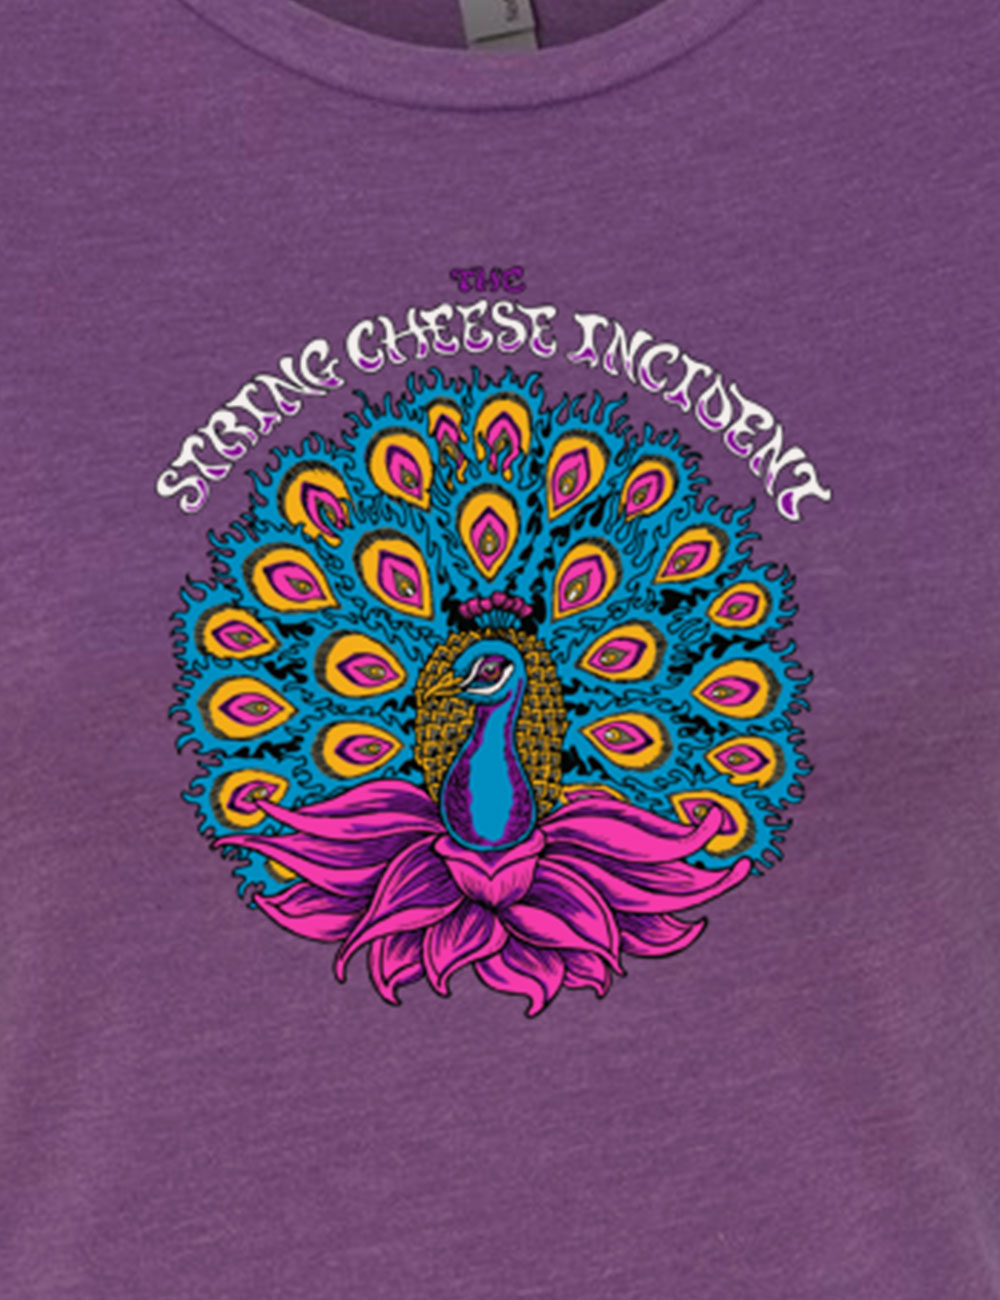 The String Cheese Incident - T-shirts- Women - Peacock Purple Closeup Detail